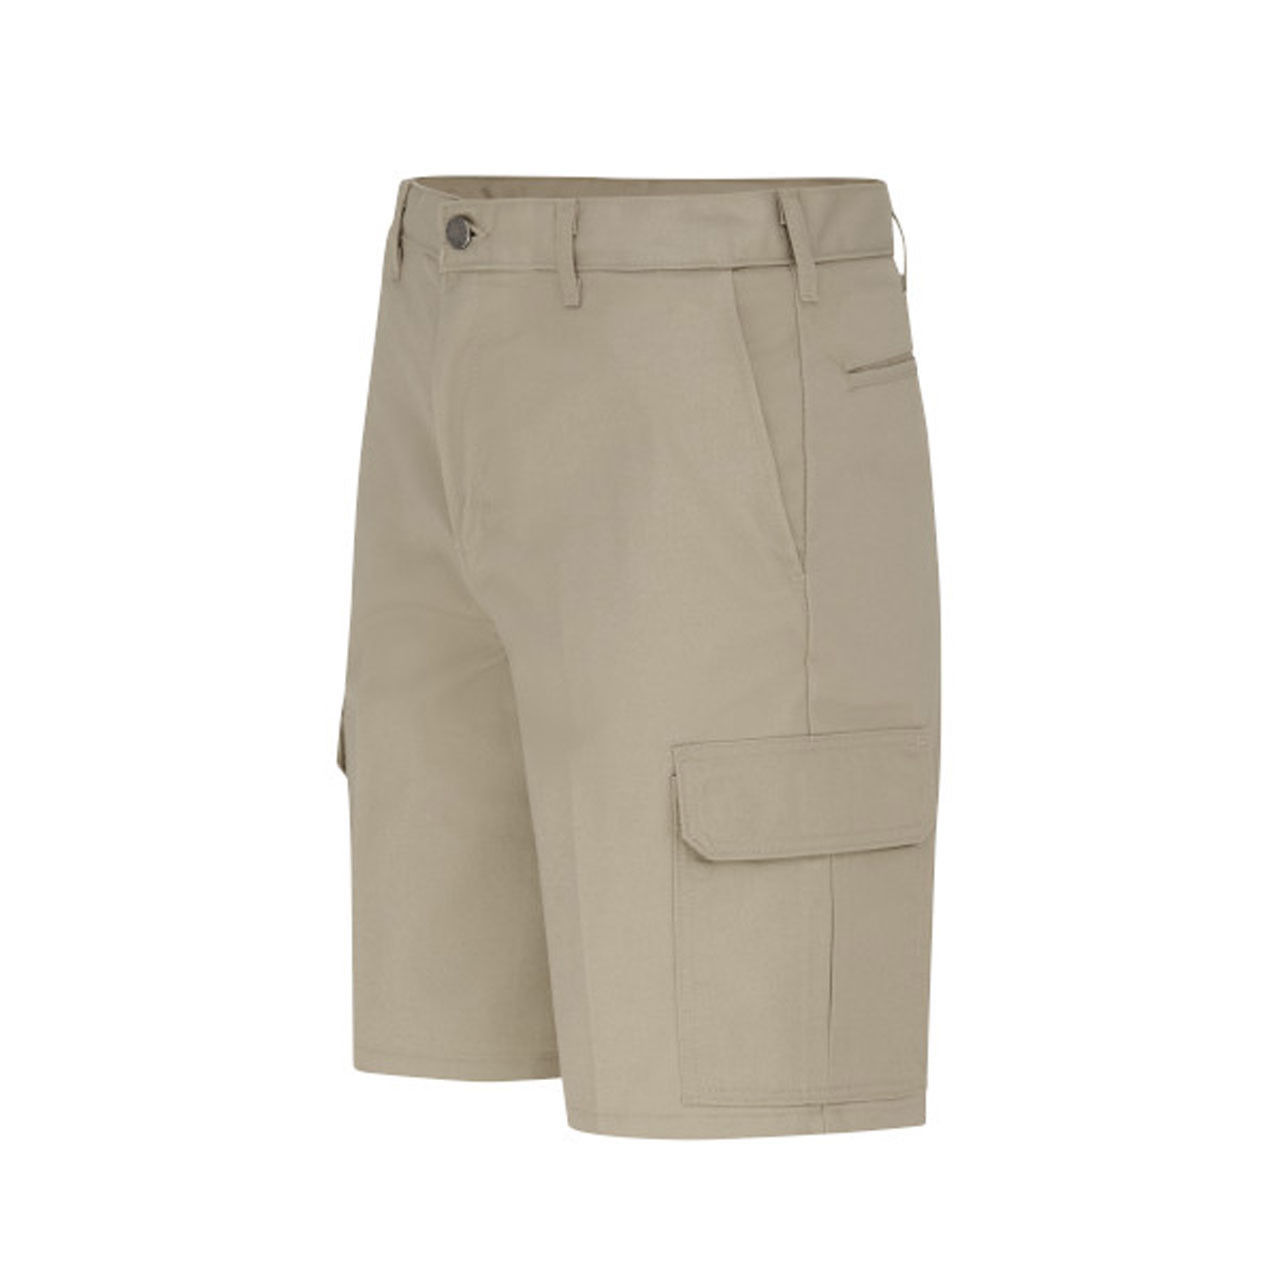 From where are the Dickies Industrial Cargo Short - LR00, dickies cargo shorts, shipped?